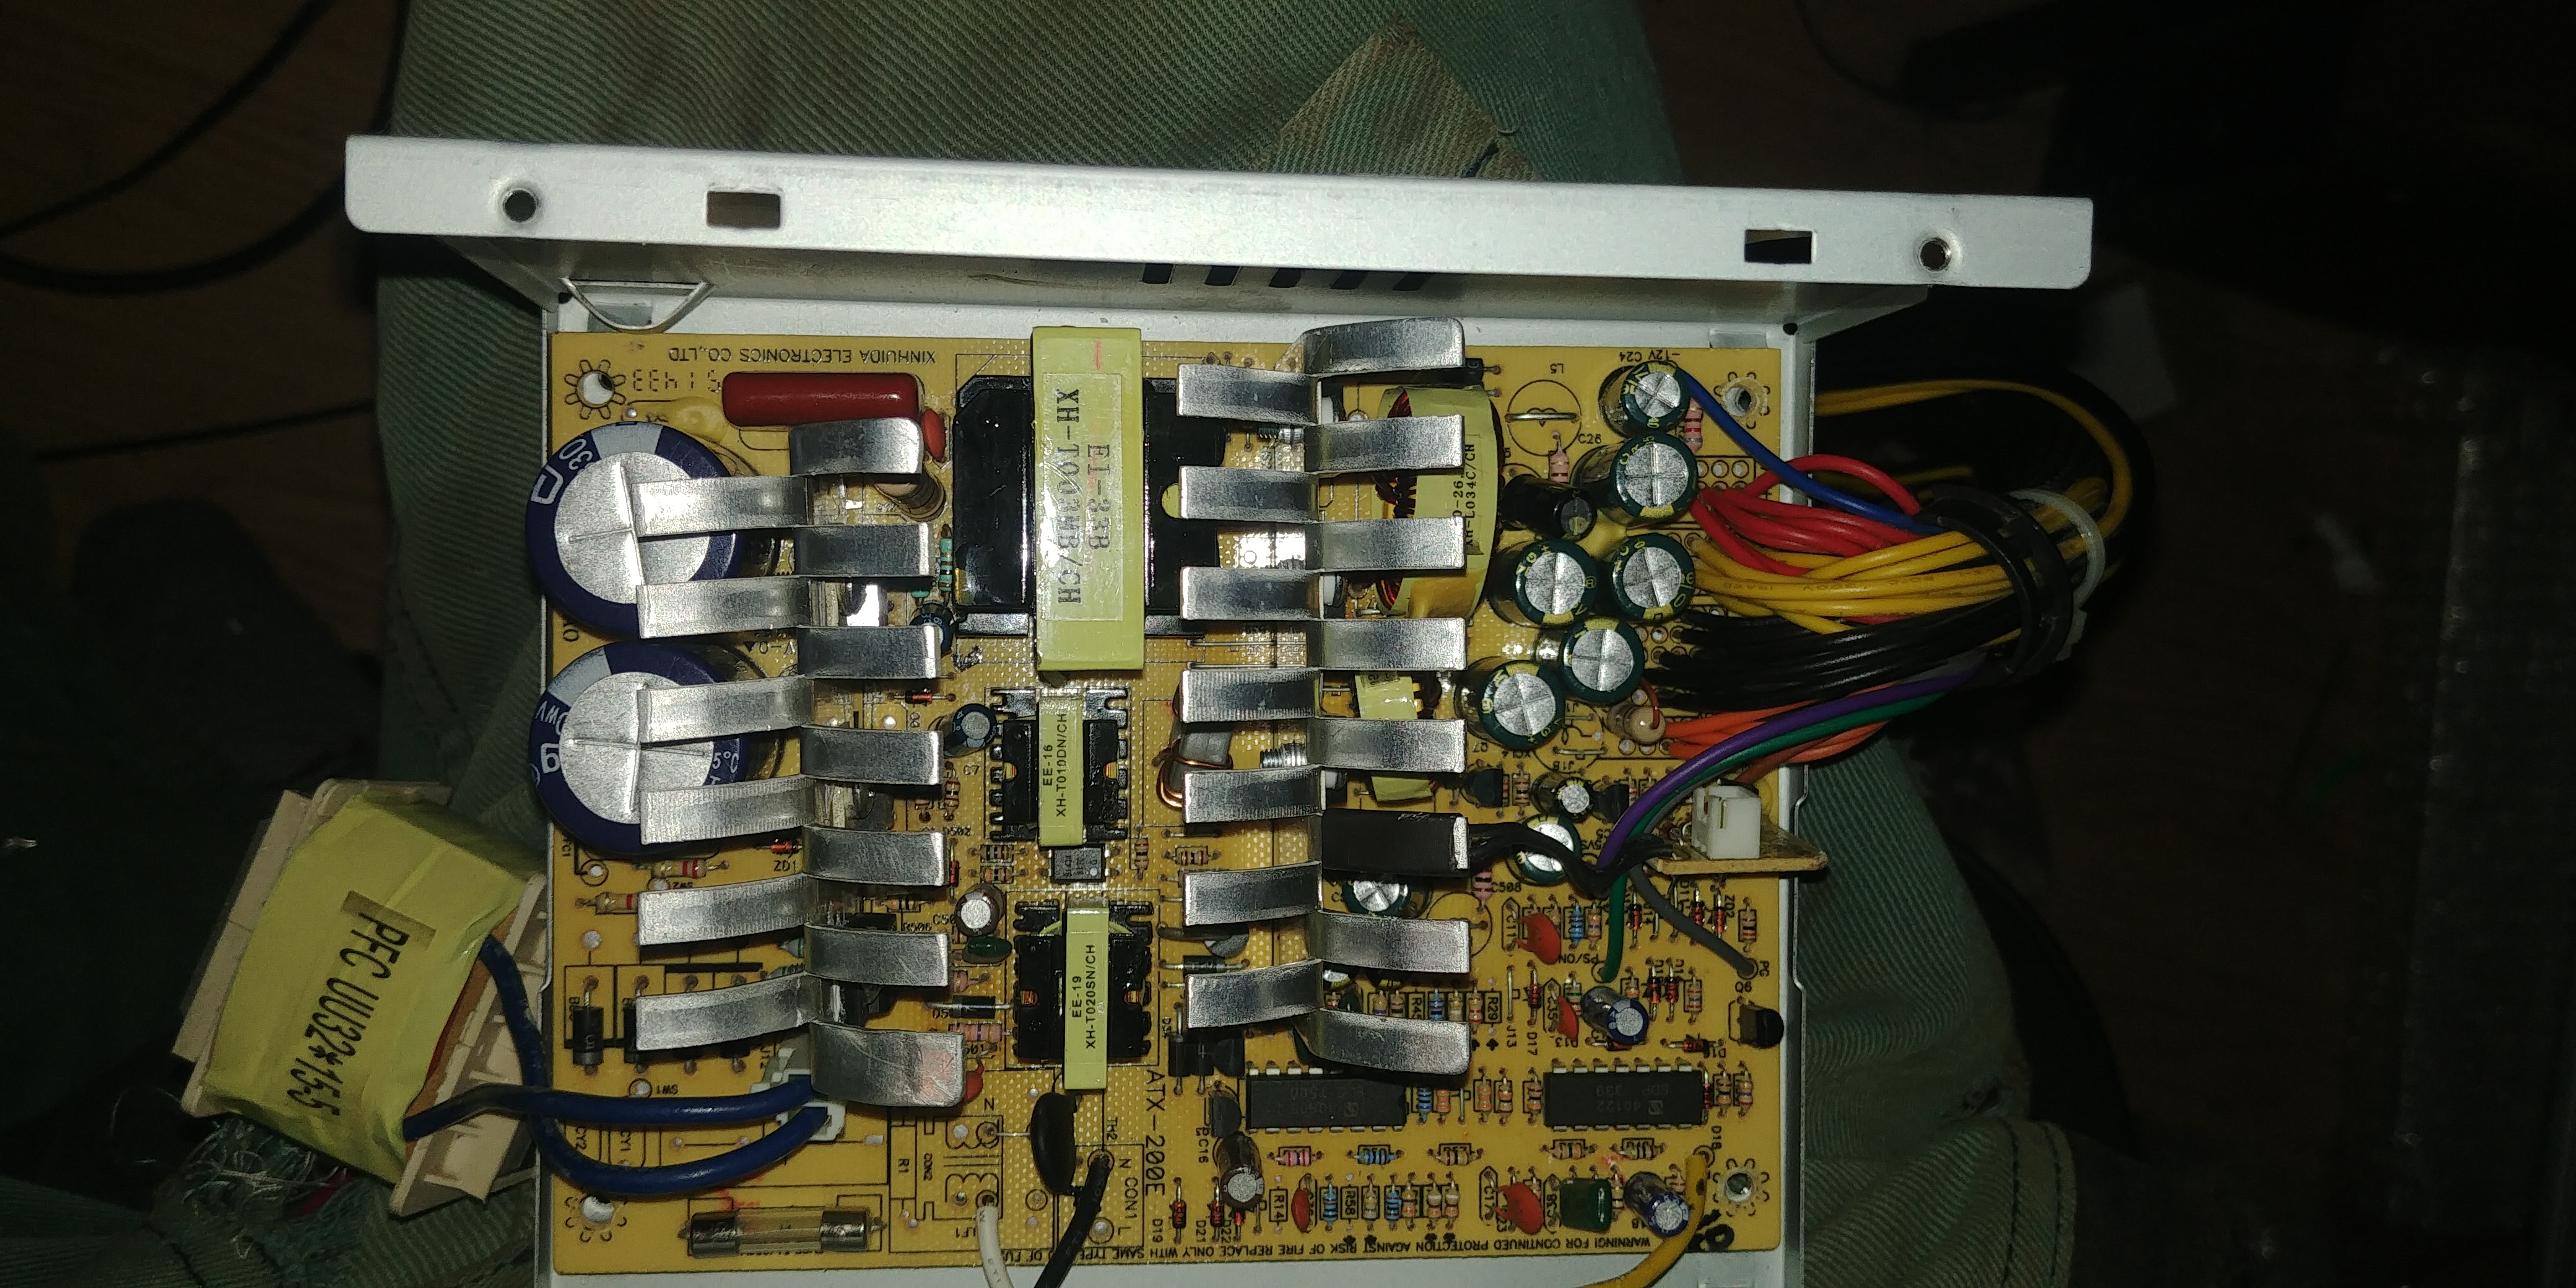 Akyga Ak-b1-450 I would like to request a wiring diagram for an ATX 450W power supply. There is a name on the panel that is xh-p200e rev D 02B. Thanks!